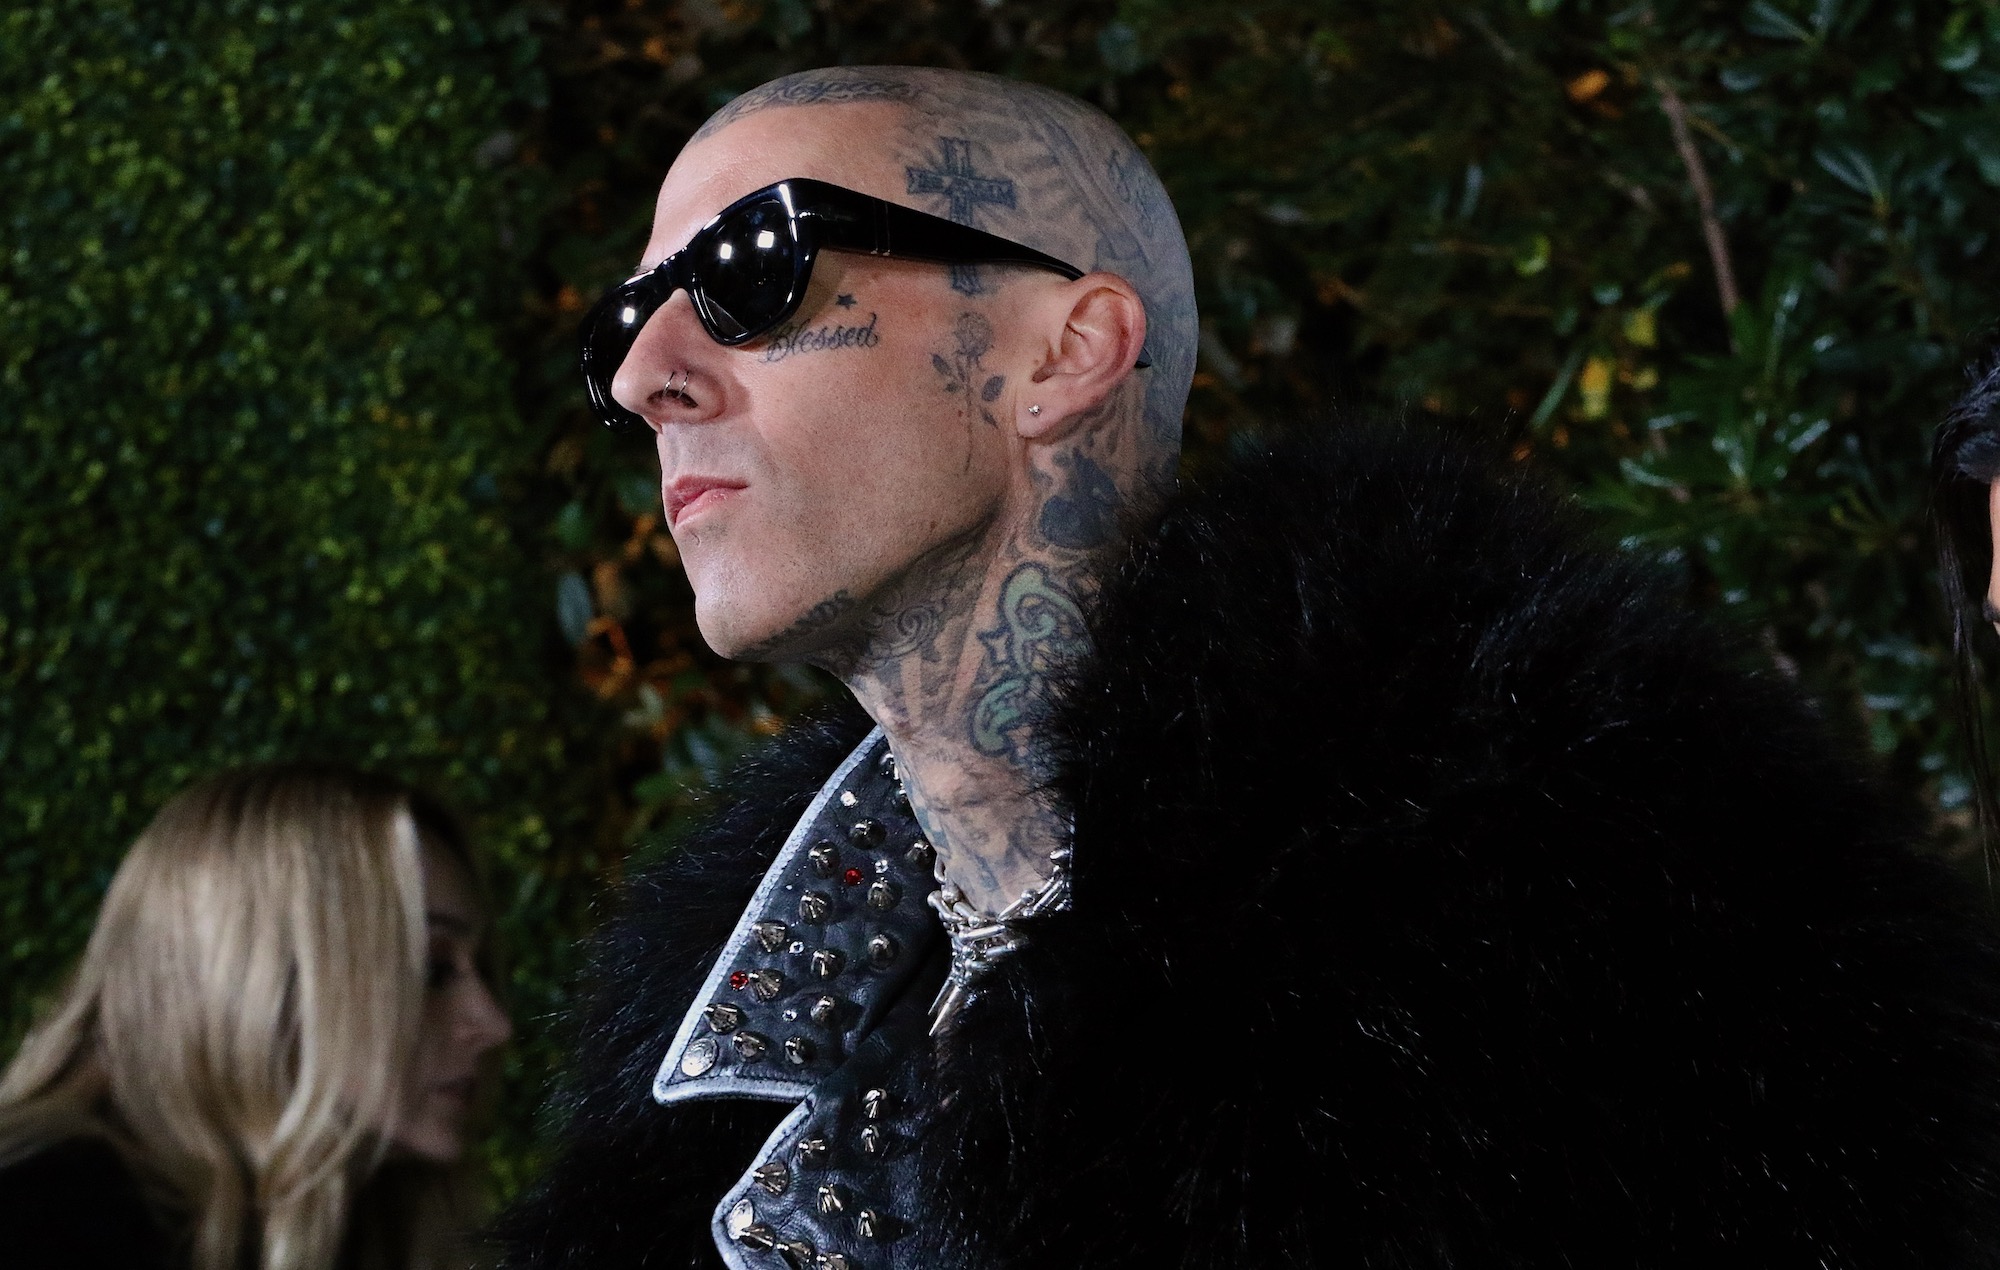 Travis Barker says his finger surgery was “a success”: “I can keep doing what I love”